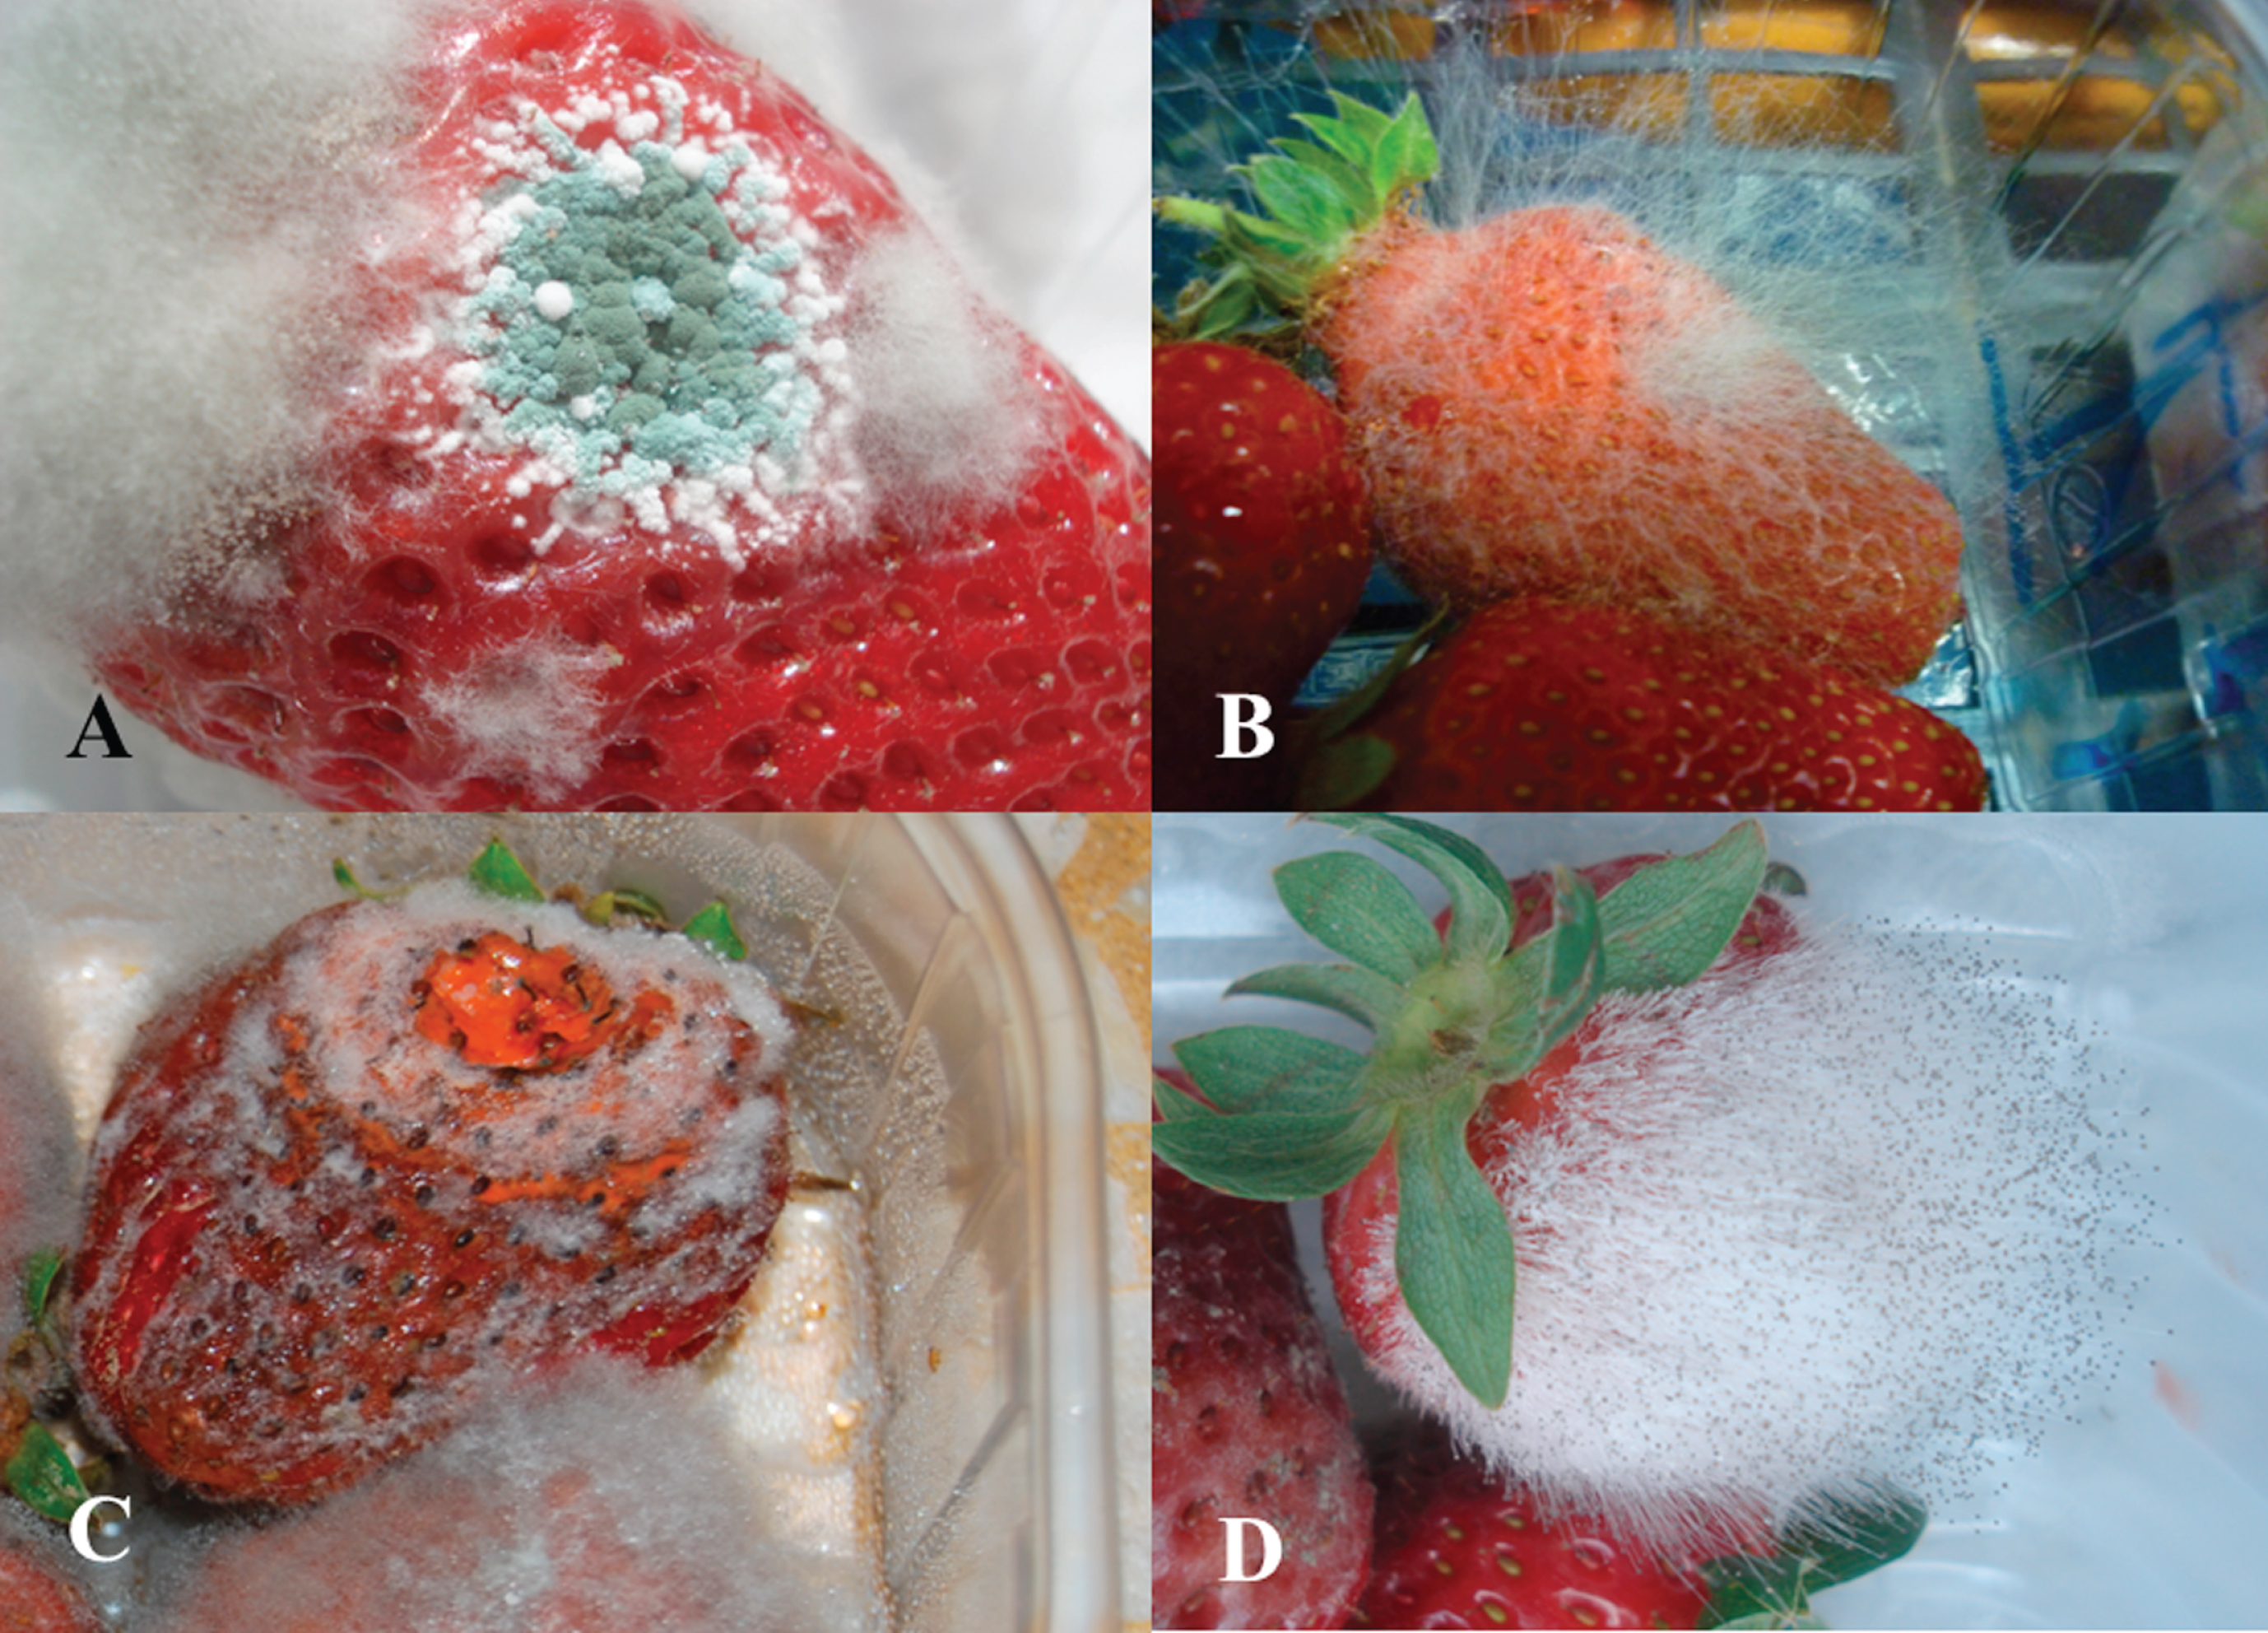 Postharvest strawberry fruit decay caused by the fungi Penicillium spp. (circular blue and white molds) and Botrytis cinerea (fluffy gray mold) (A), Rhizopus stolonifer (B), Colletotrichum spp. (C), and Mucor spp. (D).